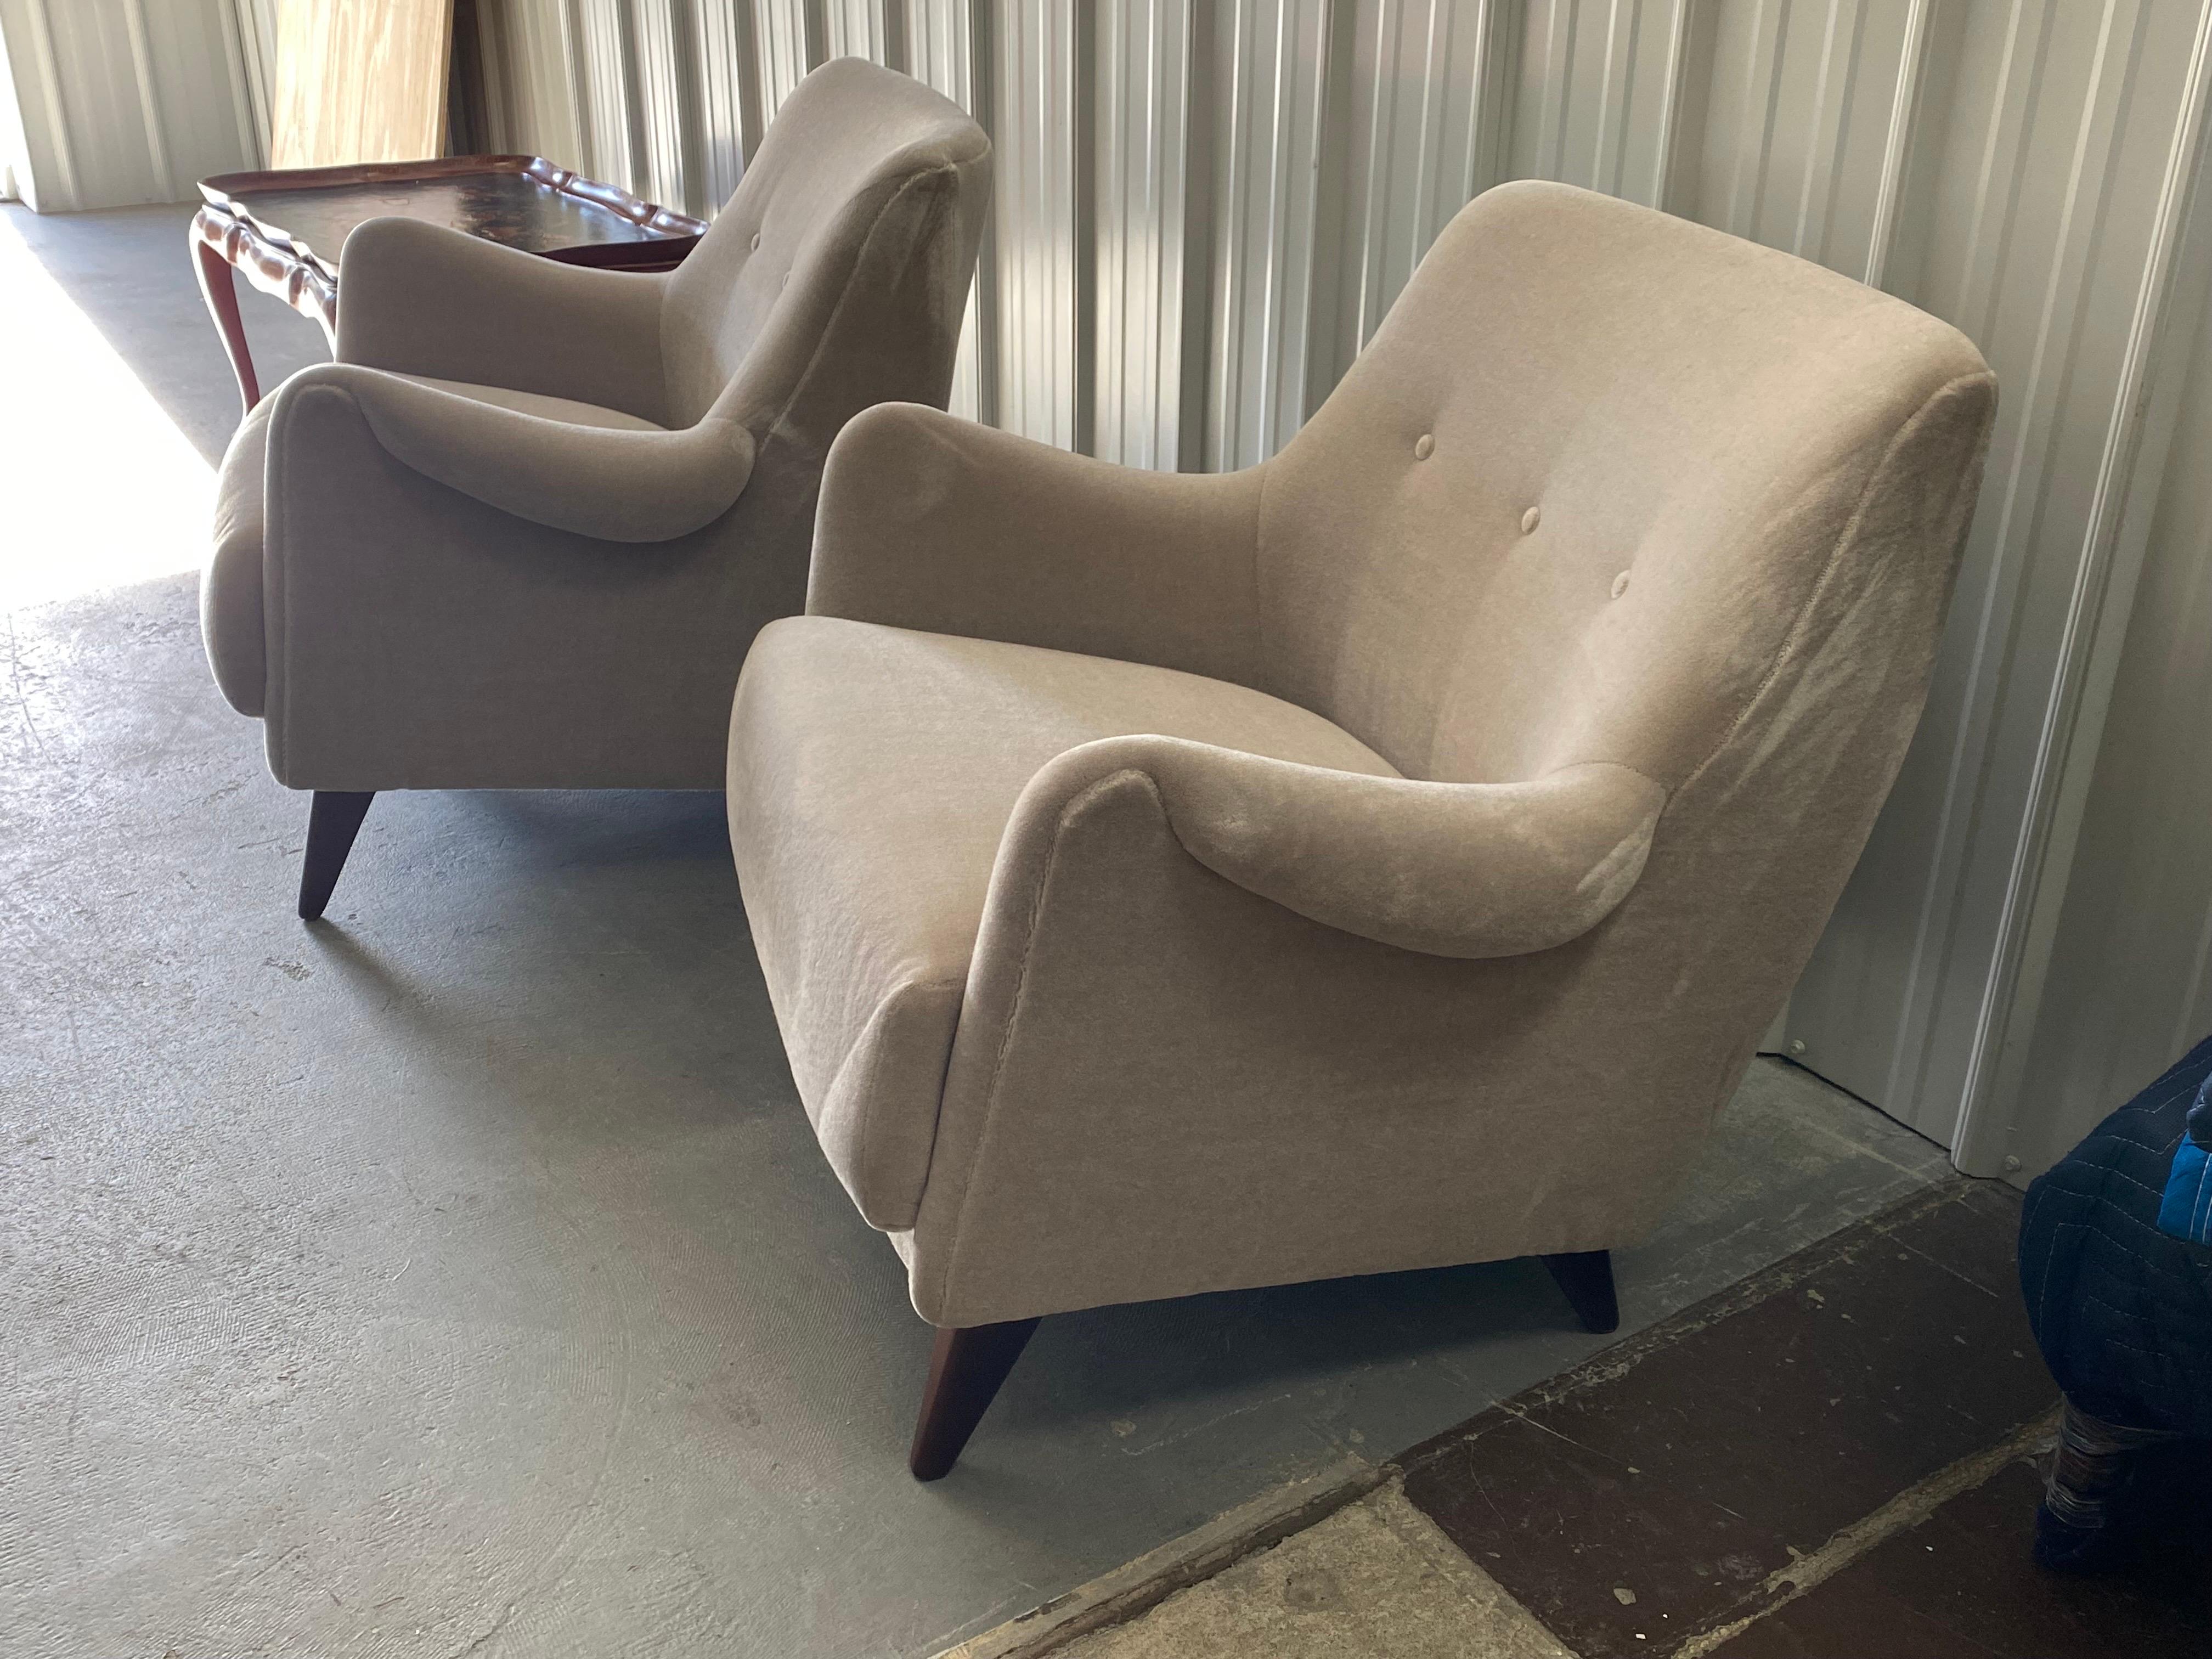 Pair of Italian Mid-Century Upholstered Mohair Armchairs.
A Ponti Augustus-esque stance but the arm is more Carl Malmsten. Designer unknown but these have all the right elements of a classic Mid-Century lounge chair.  Thought to be of Italian